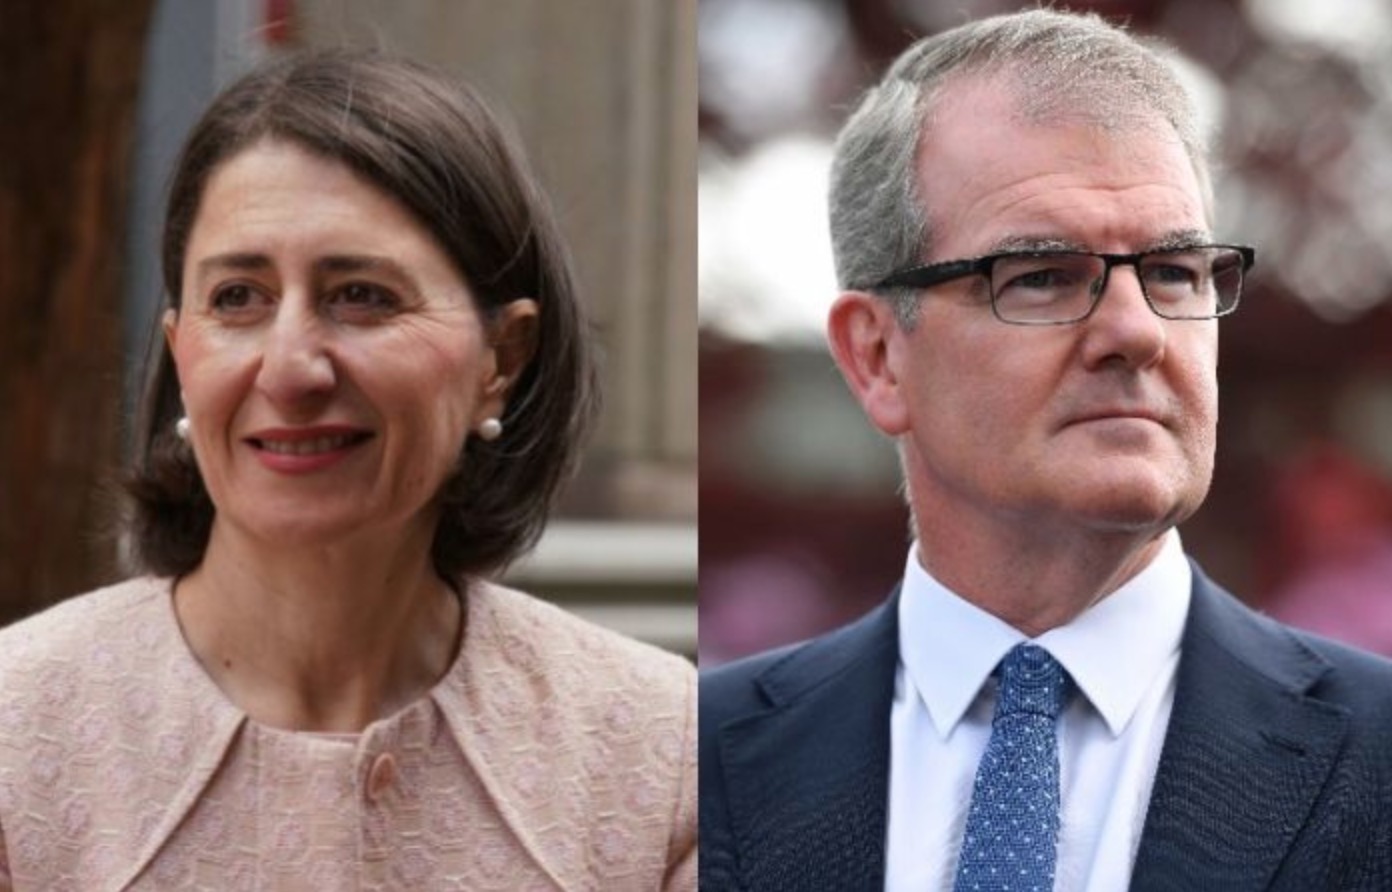   Gladys Berejiklian and Michael Daley  images - ABC and The New Daily 